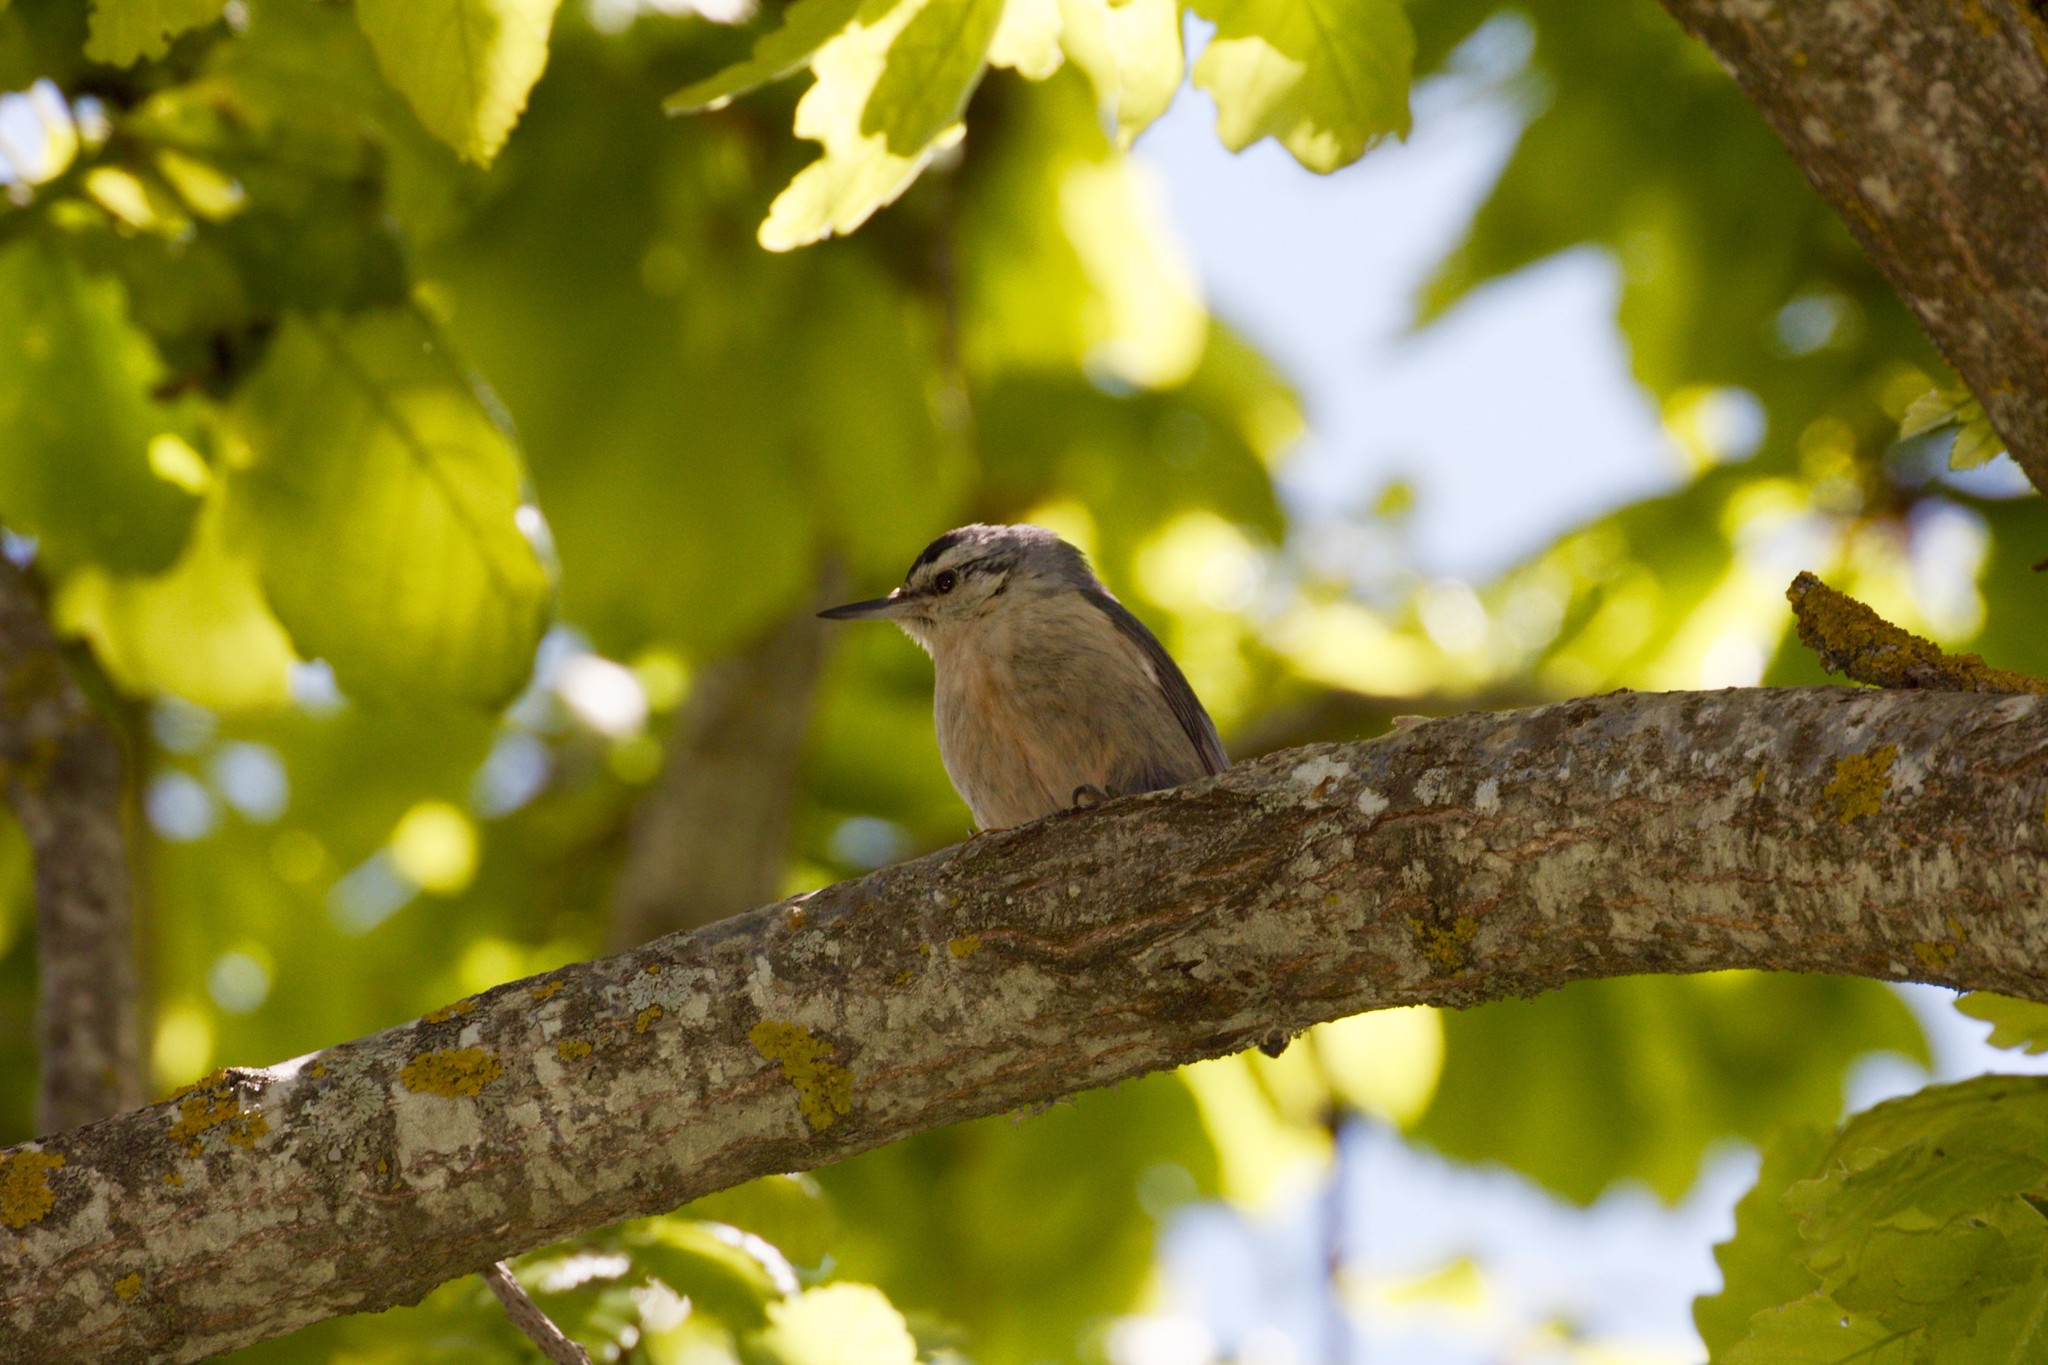 The Kabyle Nuthatch is the only endemic bird species in Algeria, where it only inhabits certain coniferous forests in the north of the country.